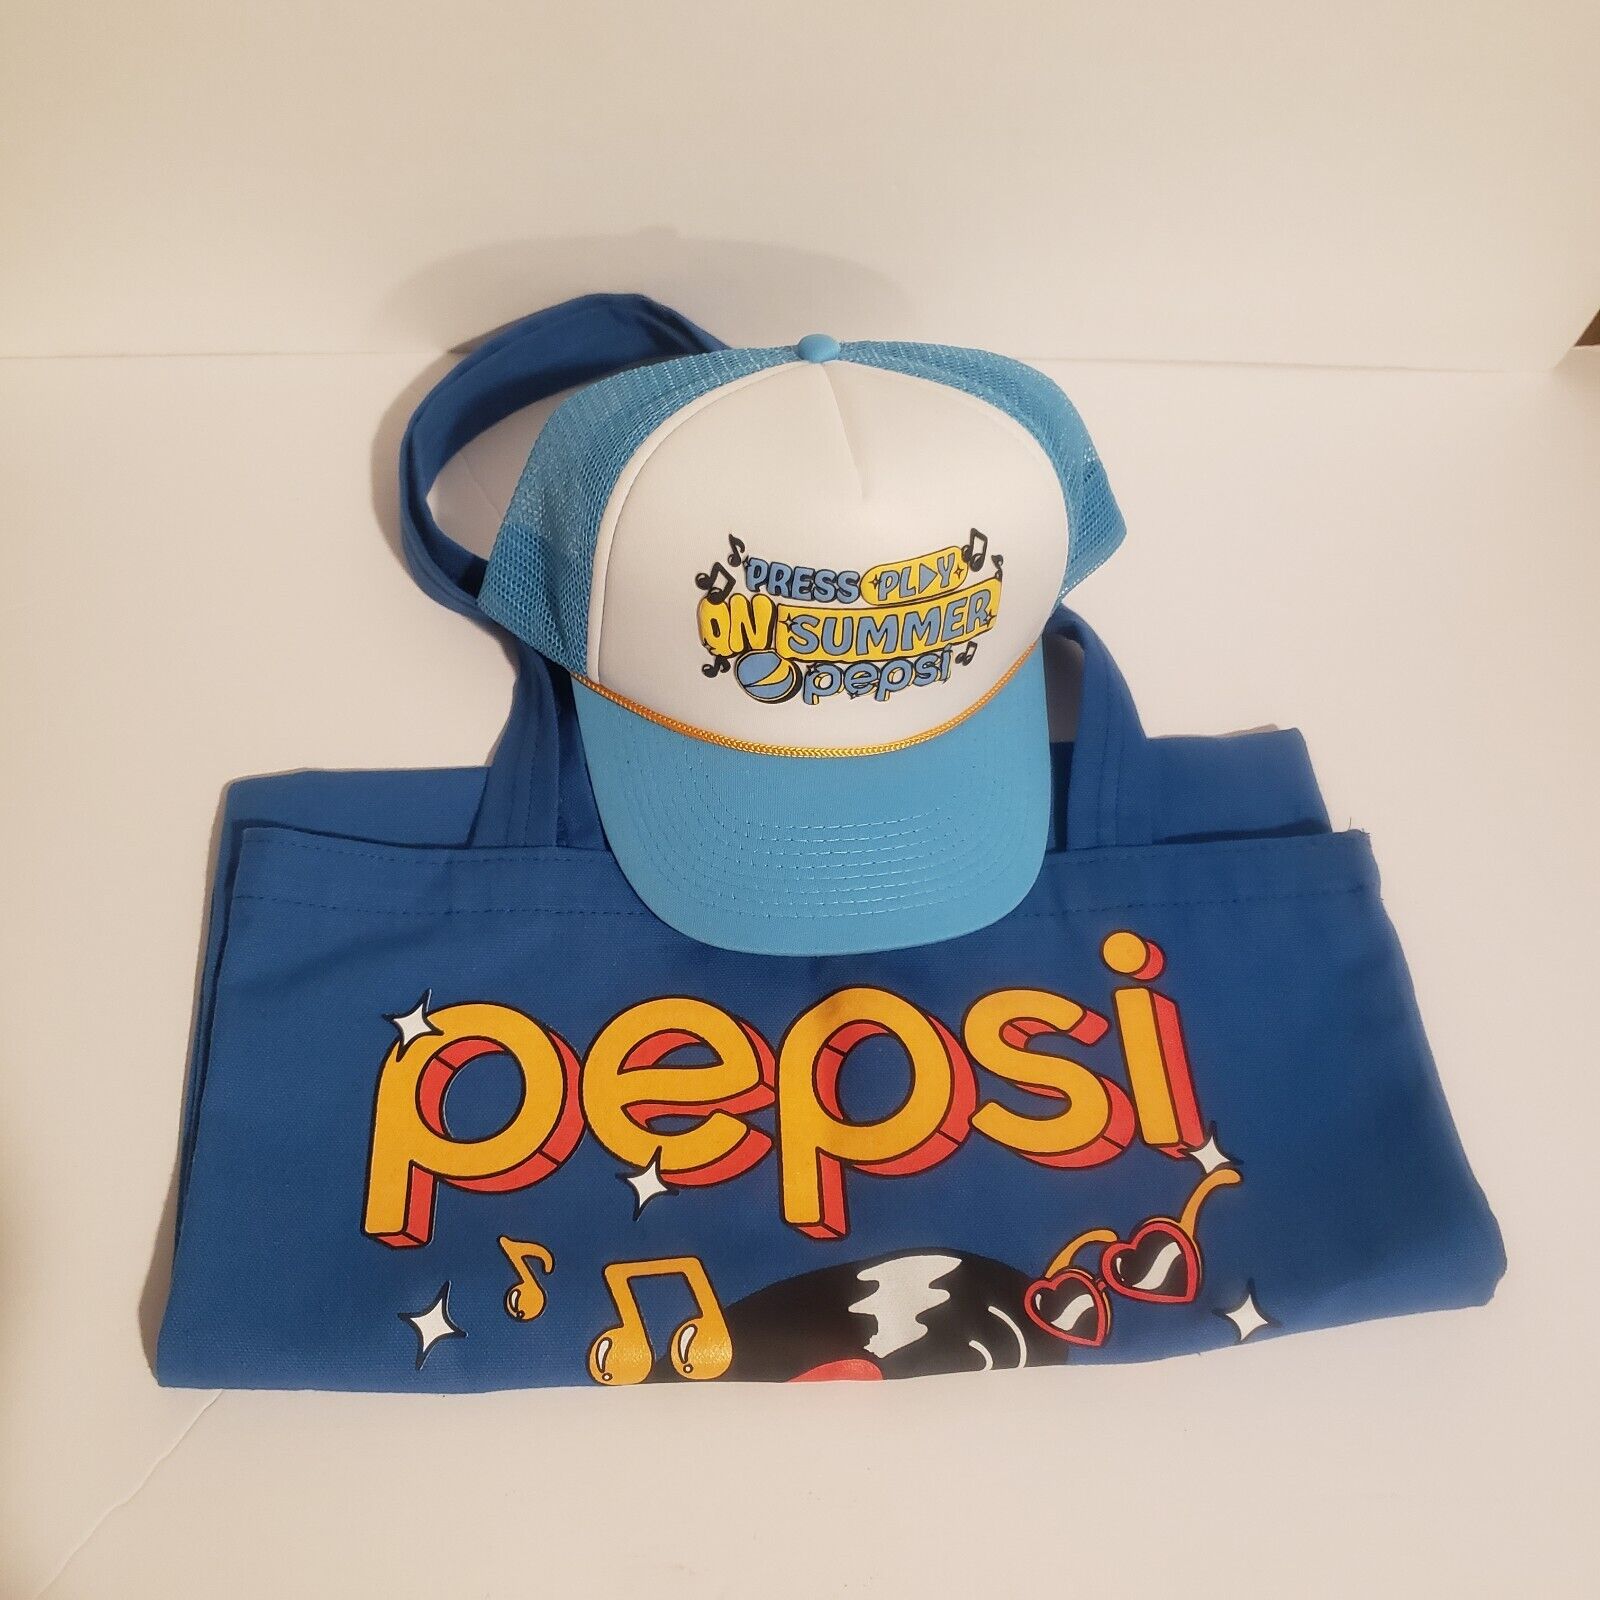 PEPSI Tote Bag AND Trucker Hat Press Play on Summer Limited Edition